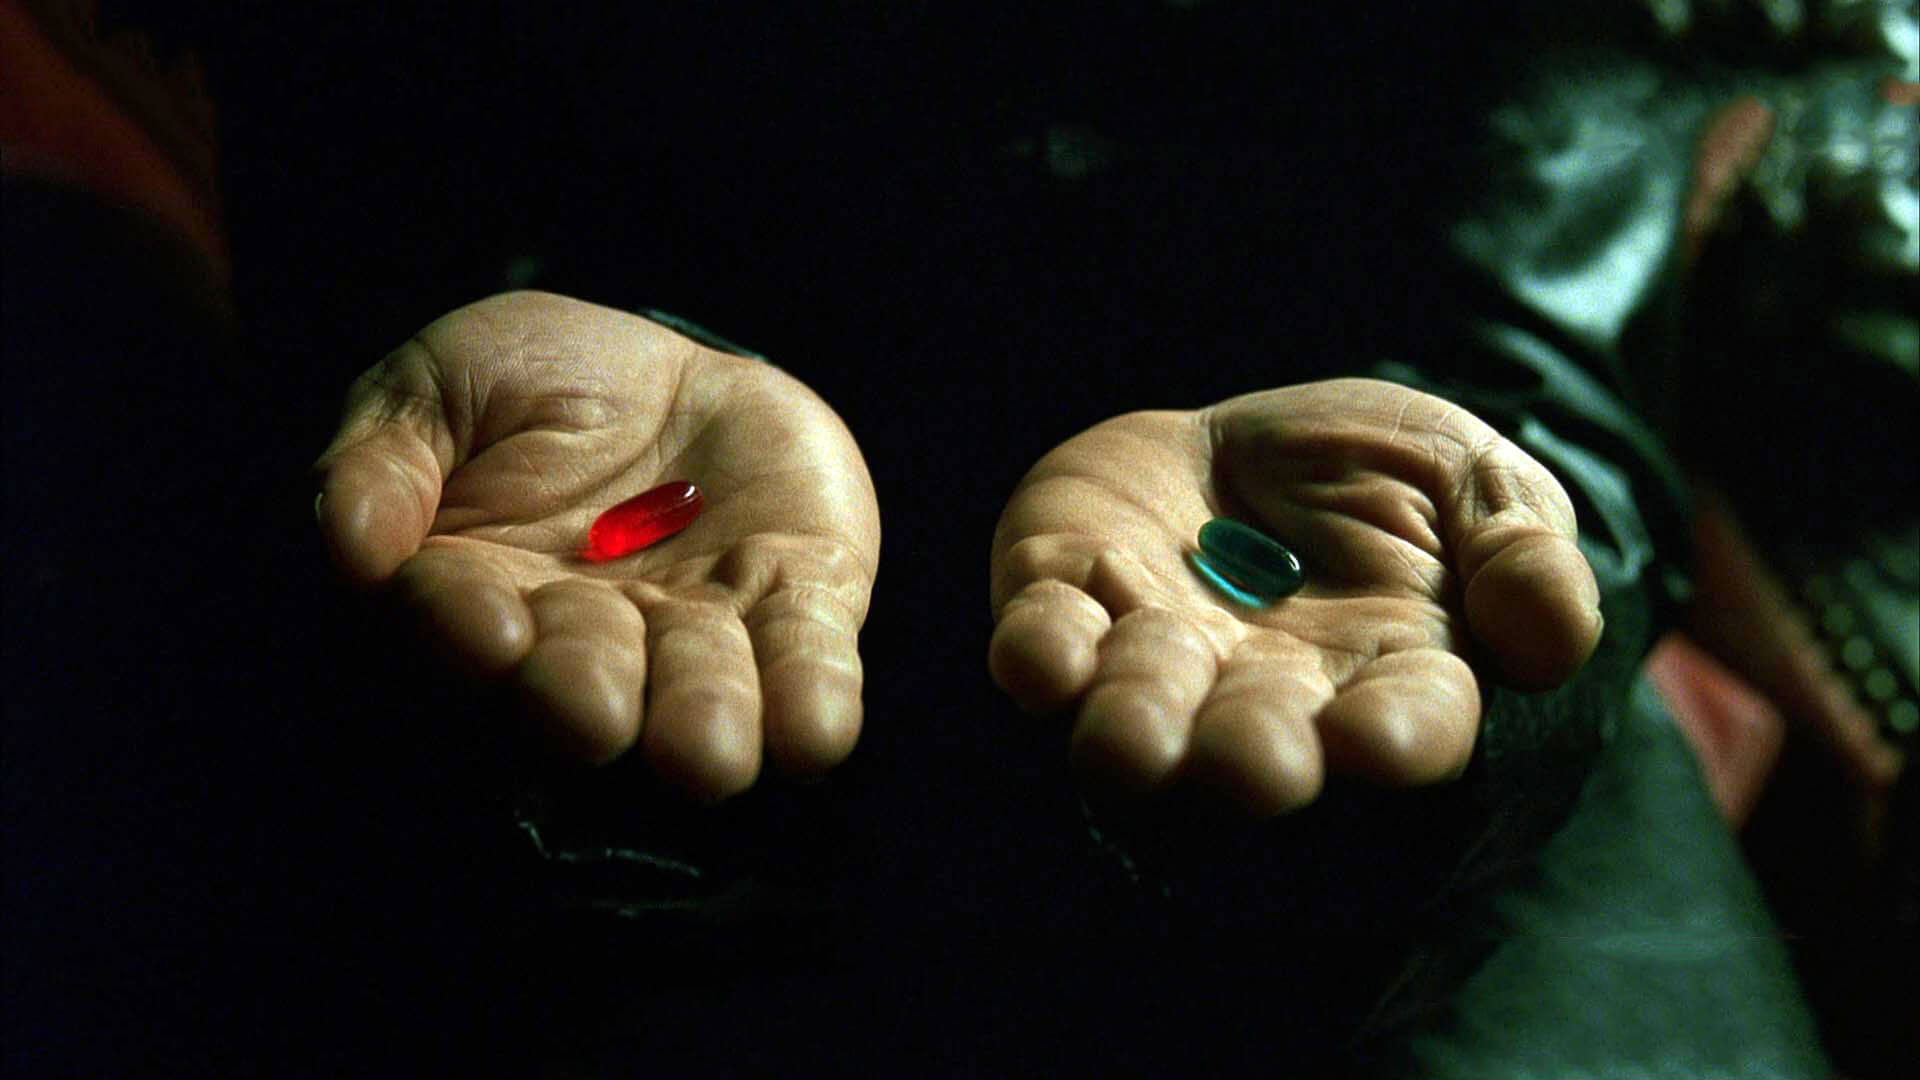 My baby a blue pill or a red pill. You choose